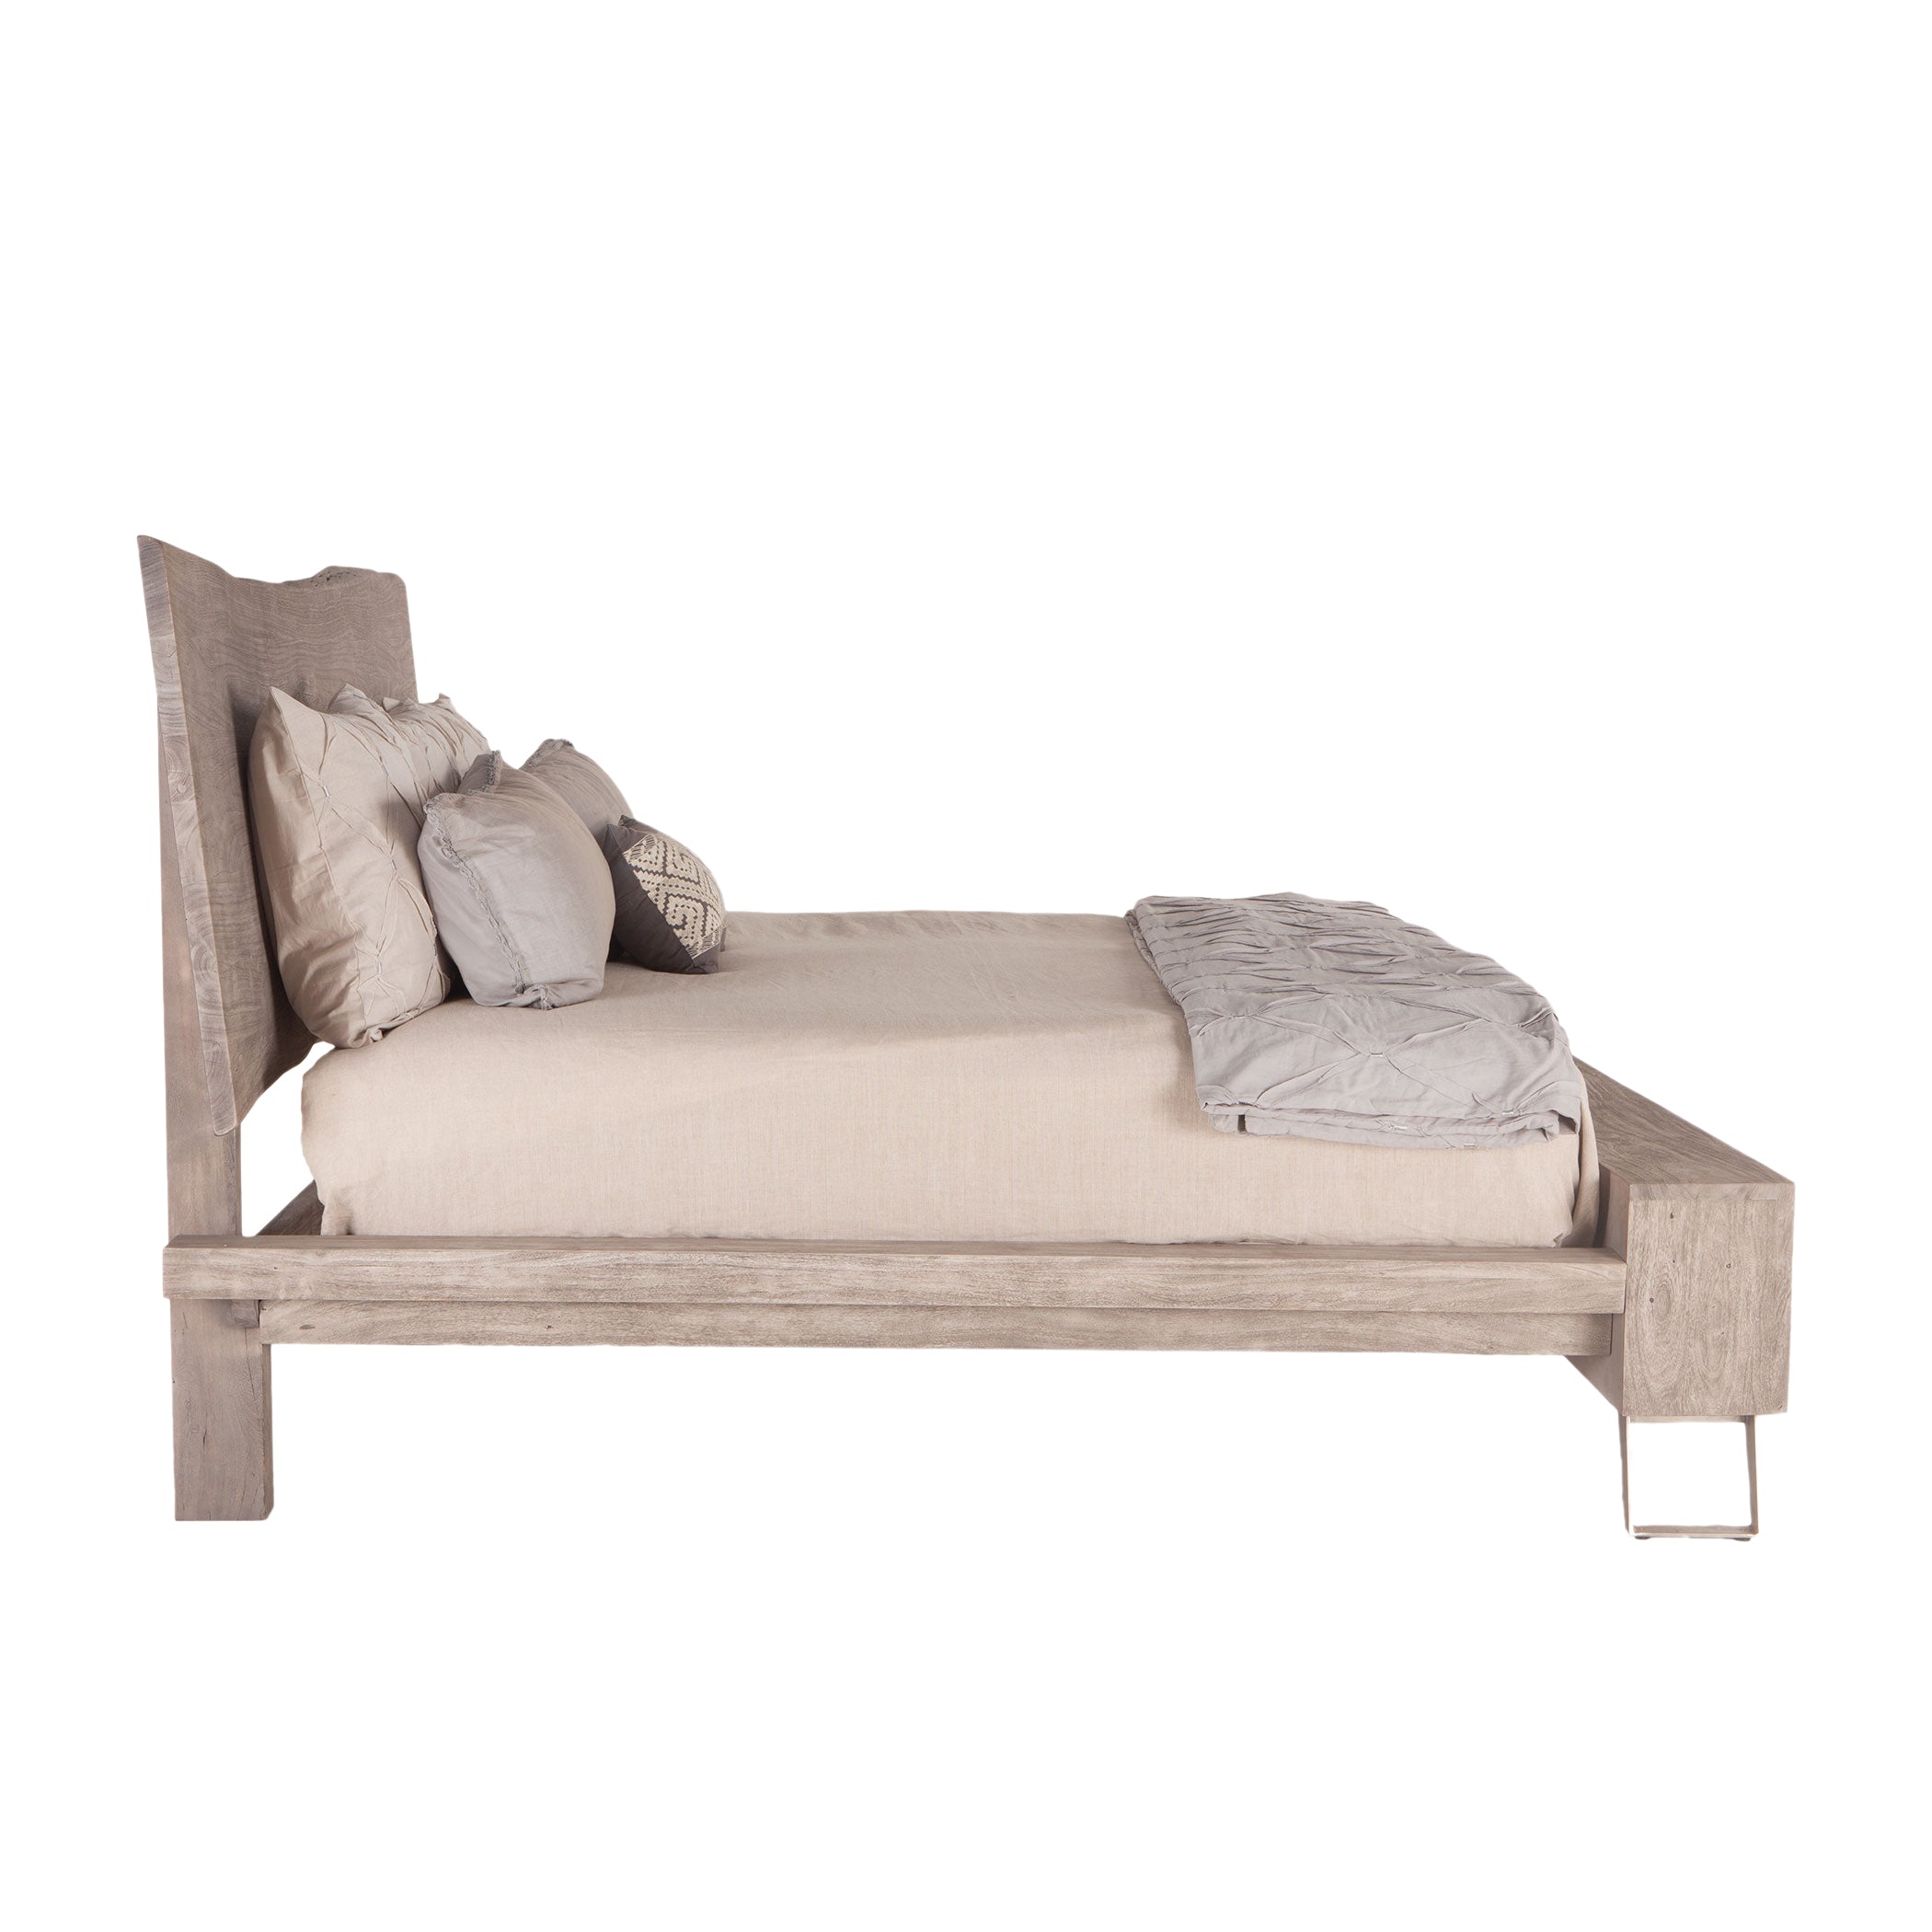 Nottingham Bed, Weathered Gray